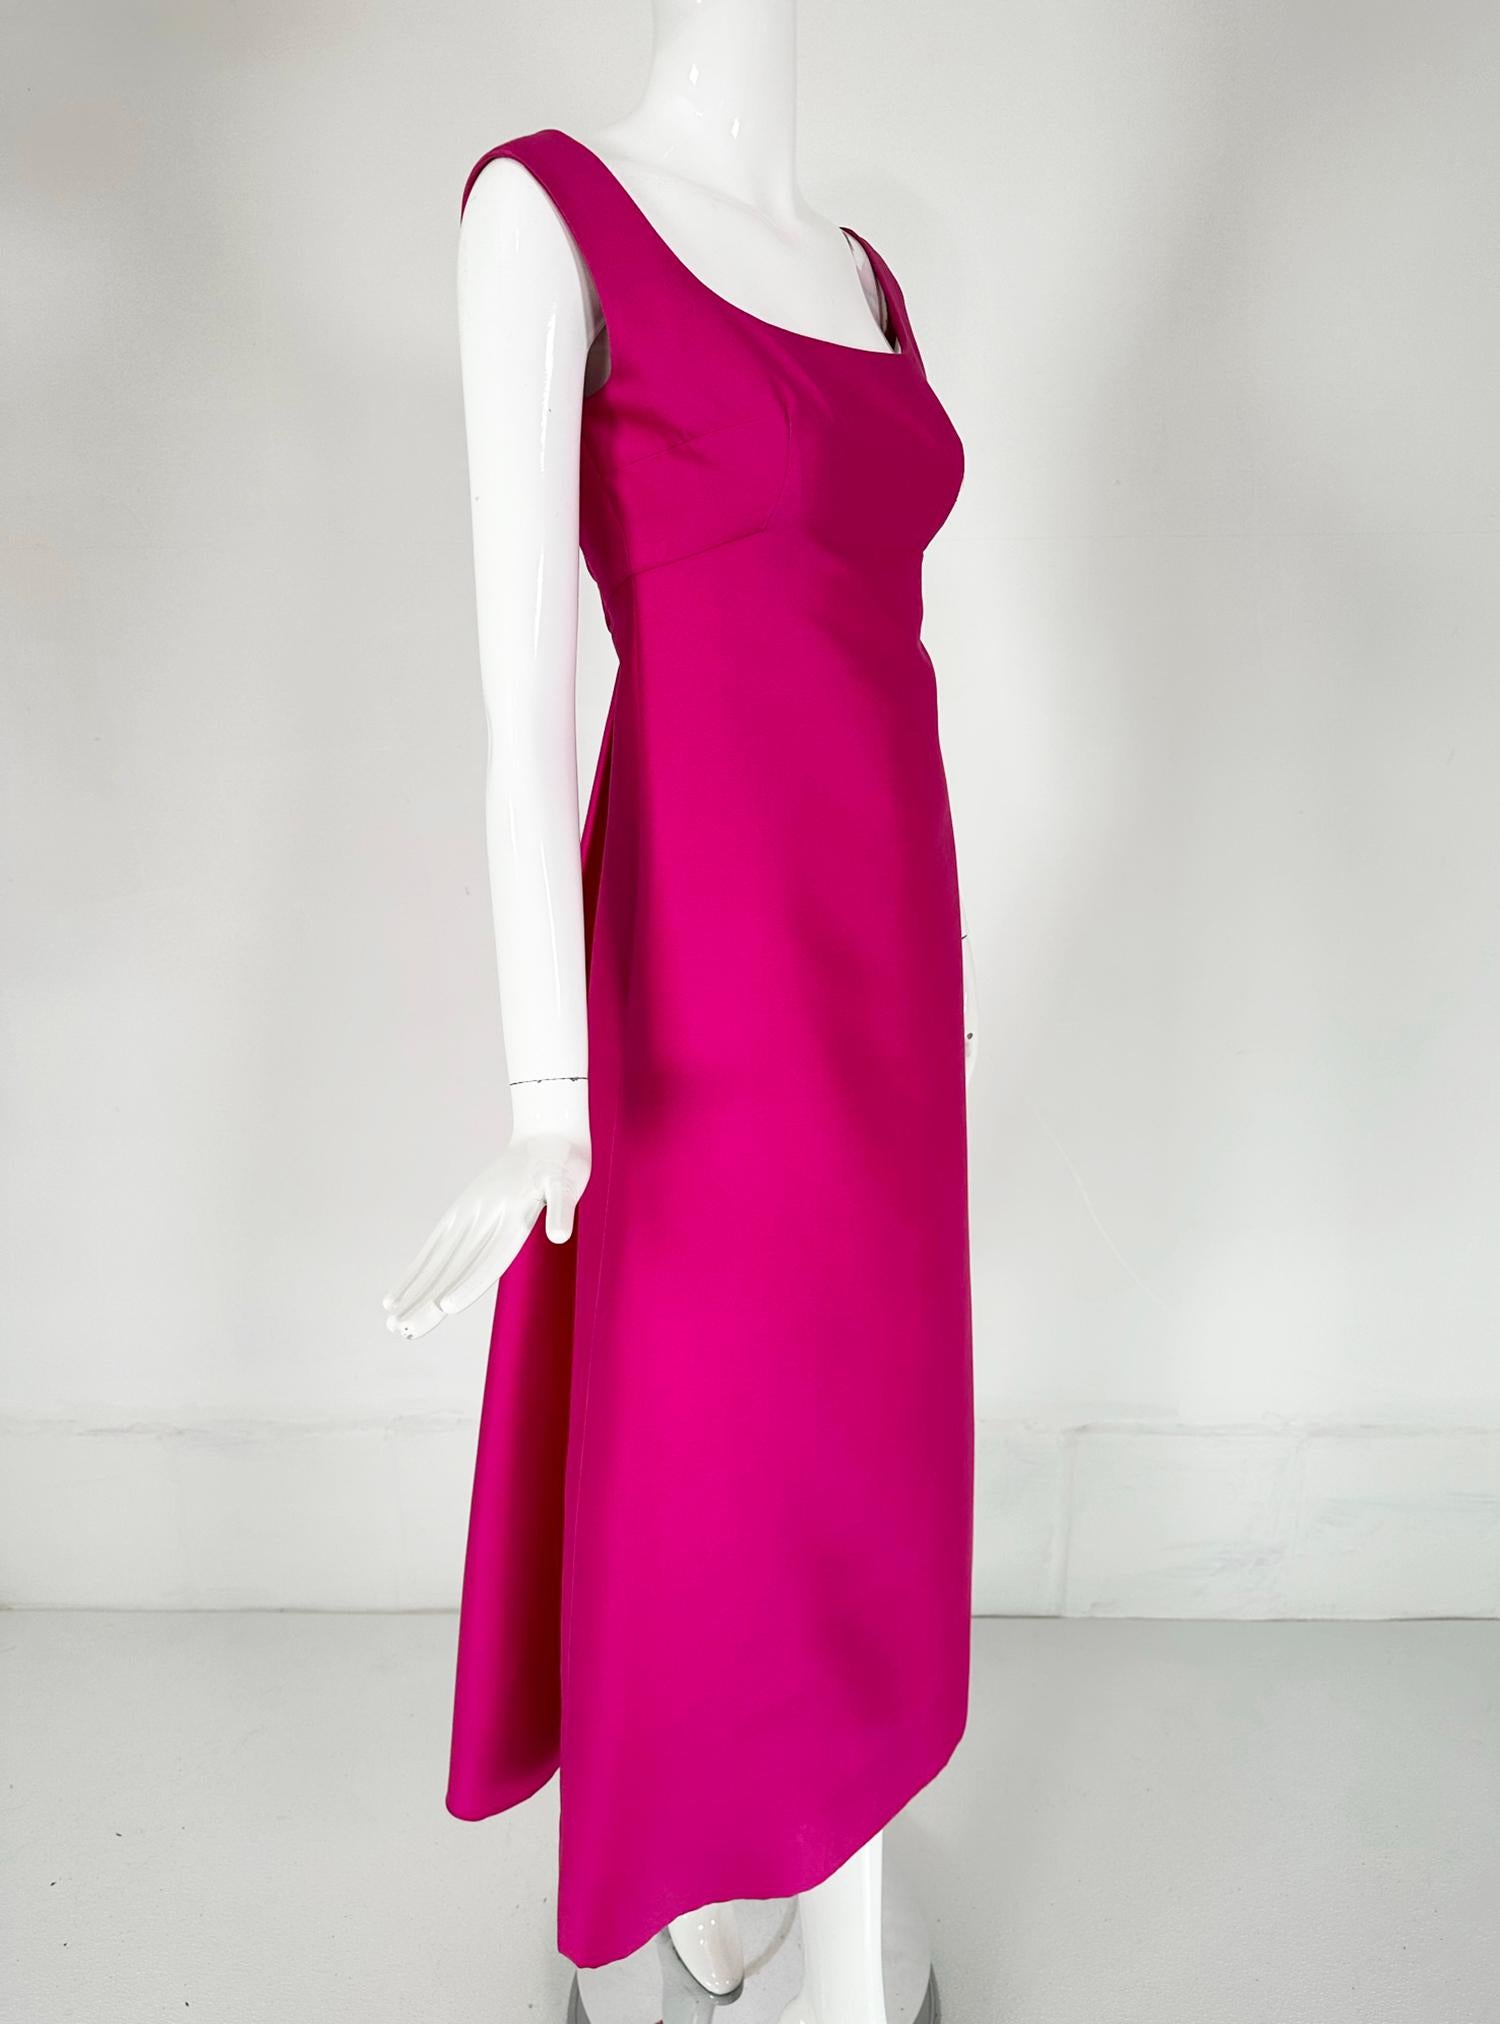 Malcolm Starr early 1960s fuchsia pink silk twill evening dress. A beautiful dress for any special occasion. Dress has low, scooped neckline at the front with high bust darts and an empire waist, continuing in an a line to the hem. The dress back is